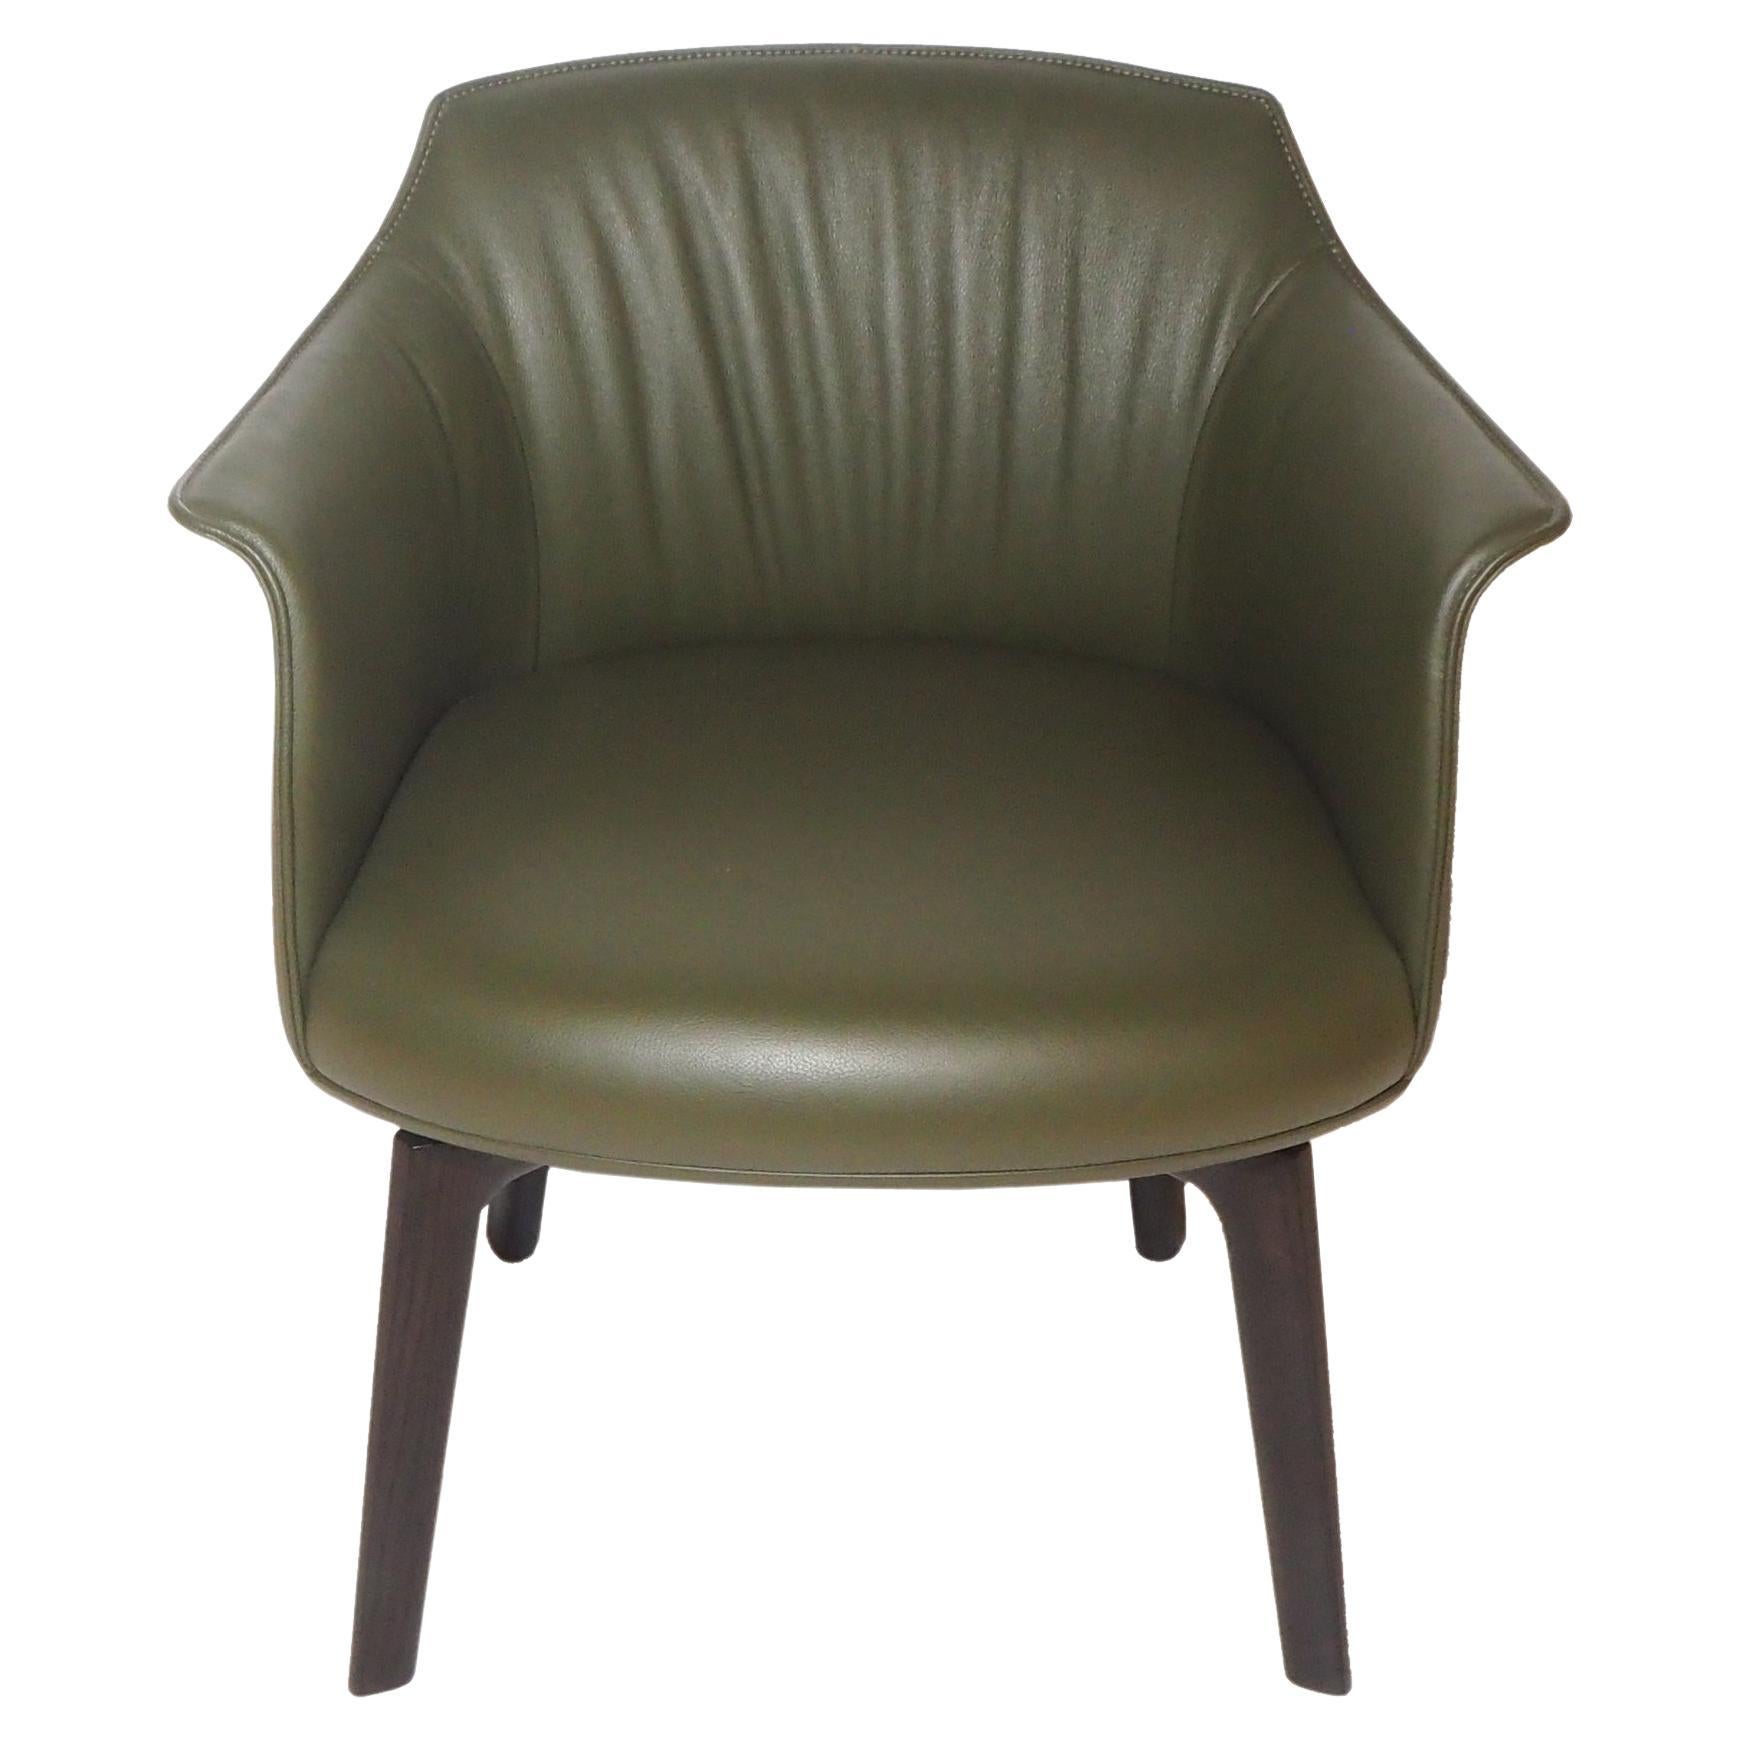 Archibald Swivel Dining Chair in genuine leather Pelle SC 177 Limo Green